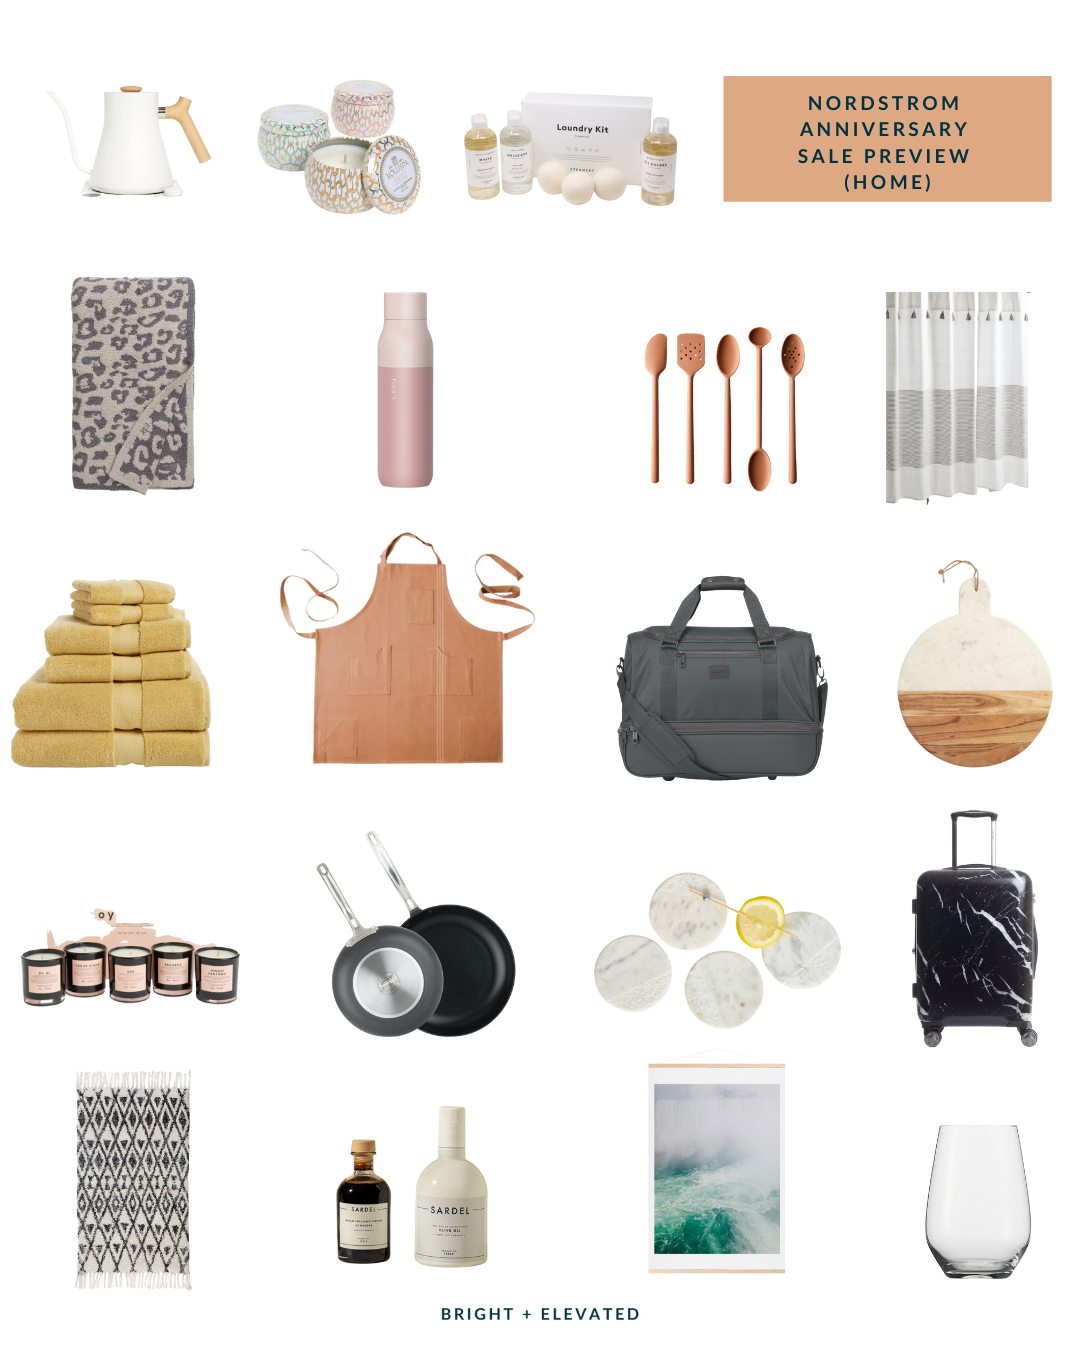 Nordstrom Early Access home preview